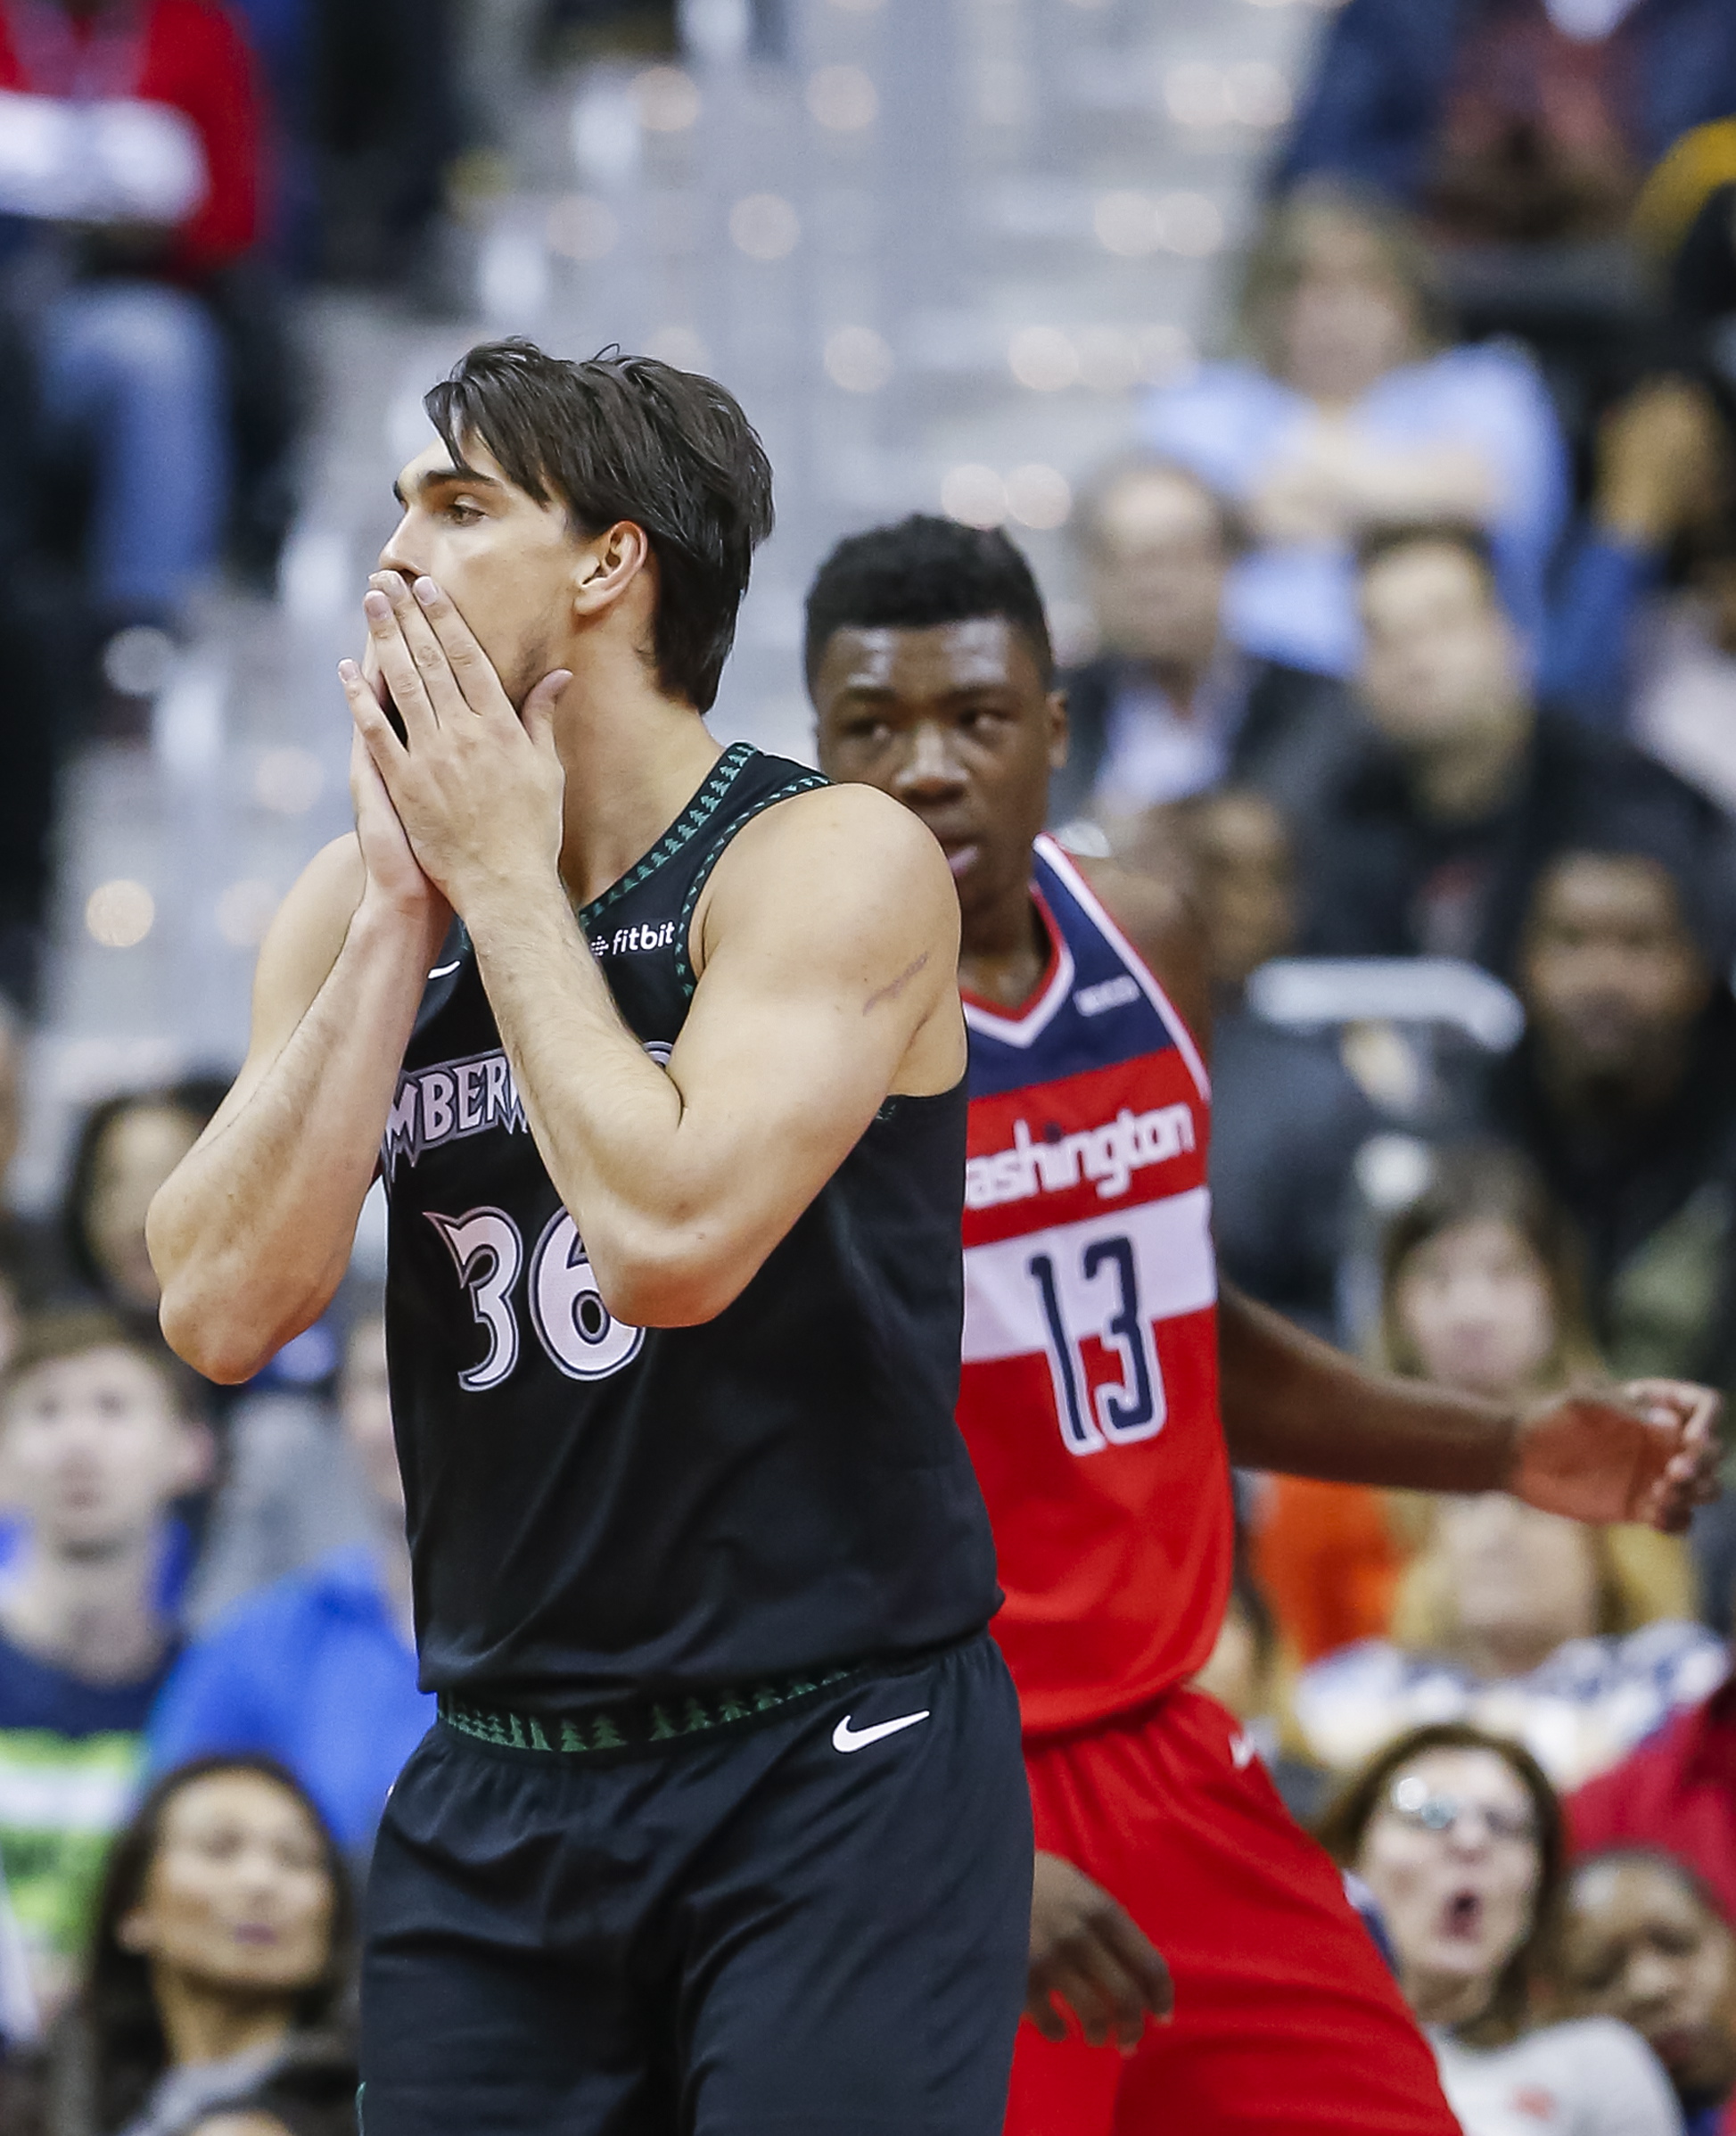 epa07412289 Minnesota Timberwolves forward Dario Saric of Croatia reacts during the second half of the NBA basketball game between the Minnesota Timberwolves and the Washington Wizards at the CapitalOne Arena in Washington, DC, USA, 03 March 2019.  EPA/ERIK S. LESSER SHUTTERSTOCK OUT